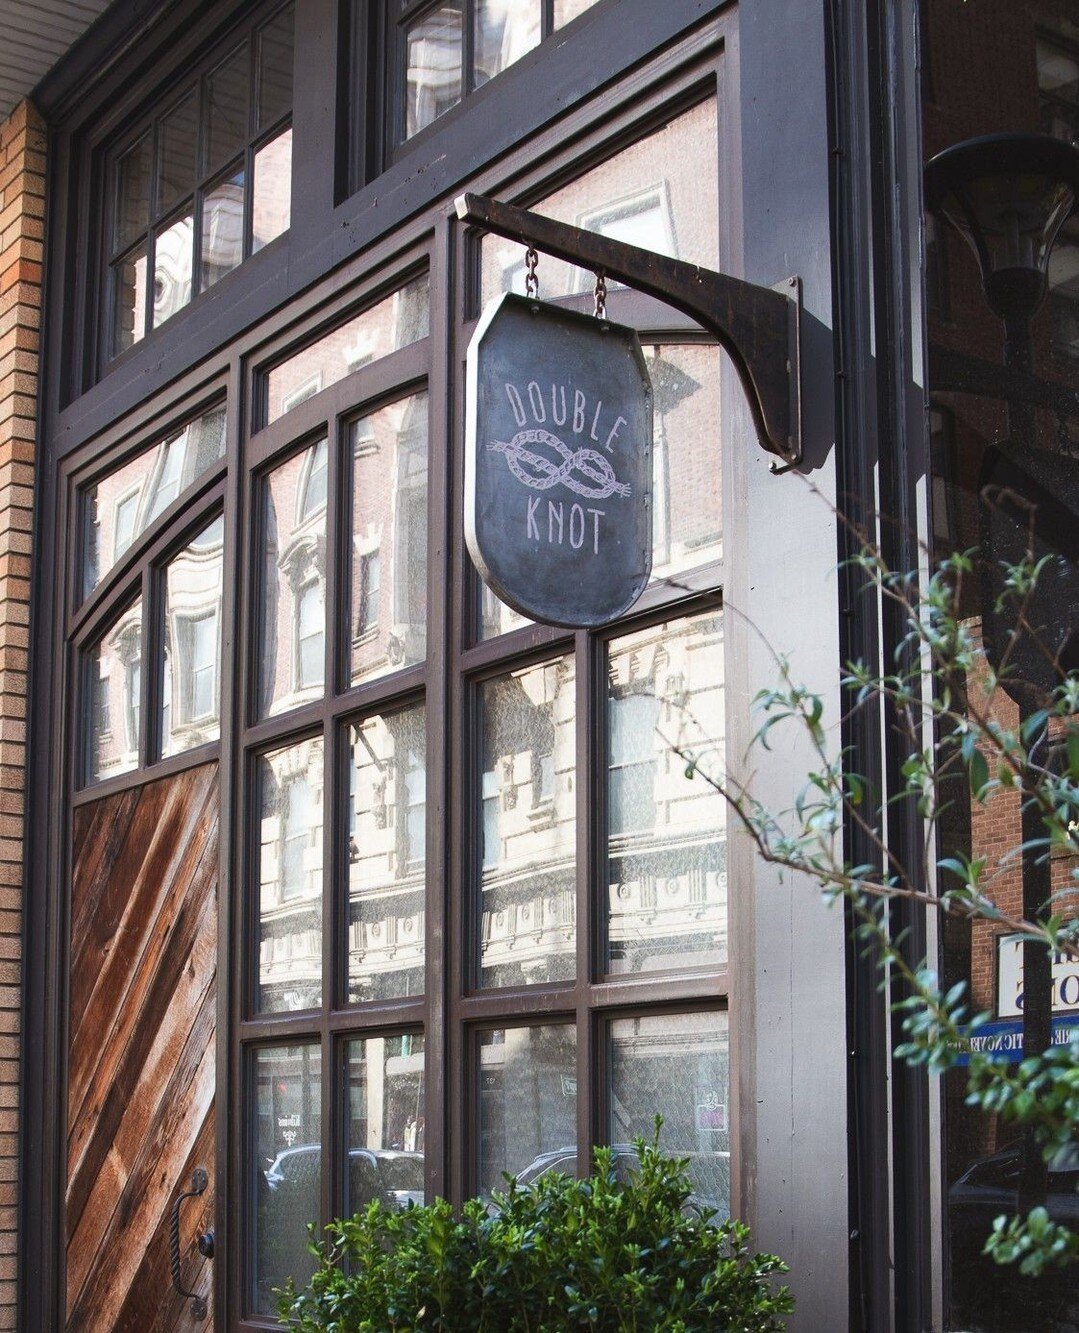 You've seen the signs, now step inside and discover your next favorite dining experience 🥢✨️⁠
⁠
TAP the link in our bio to book your spot at Double Knot⁠
⁠
#DoubleKnot #SchulsonCollective #phillyrestaurants #phillyfoodie #datenight #phillydatenight